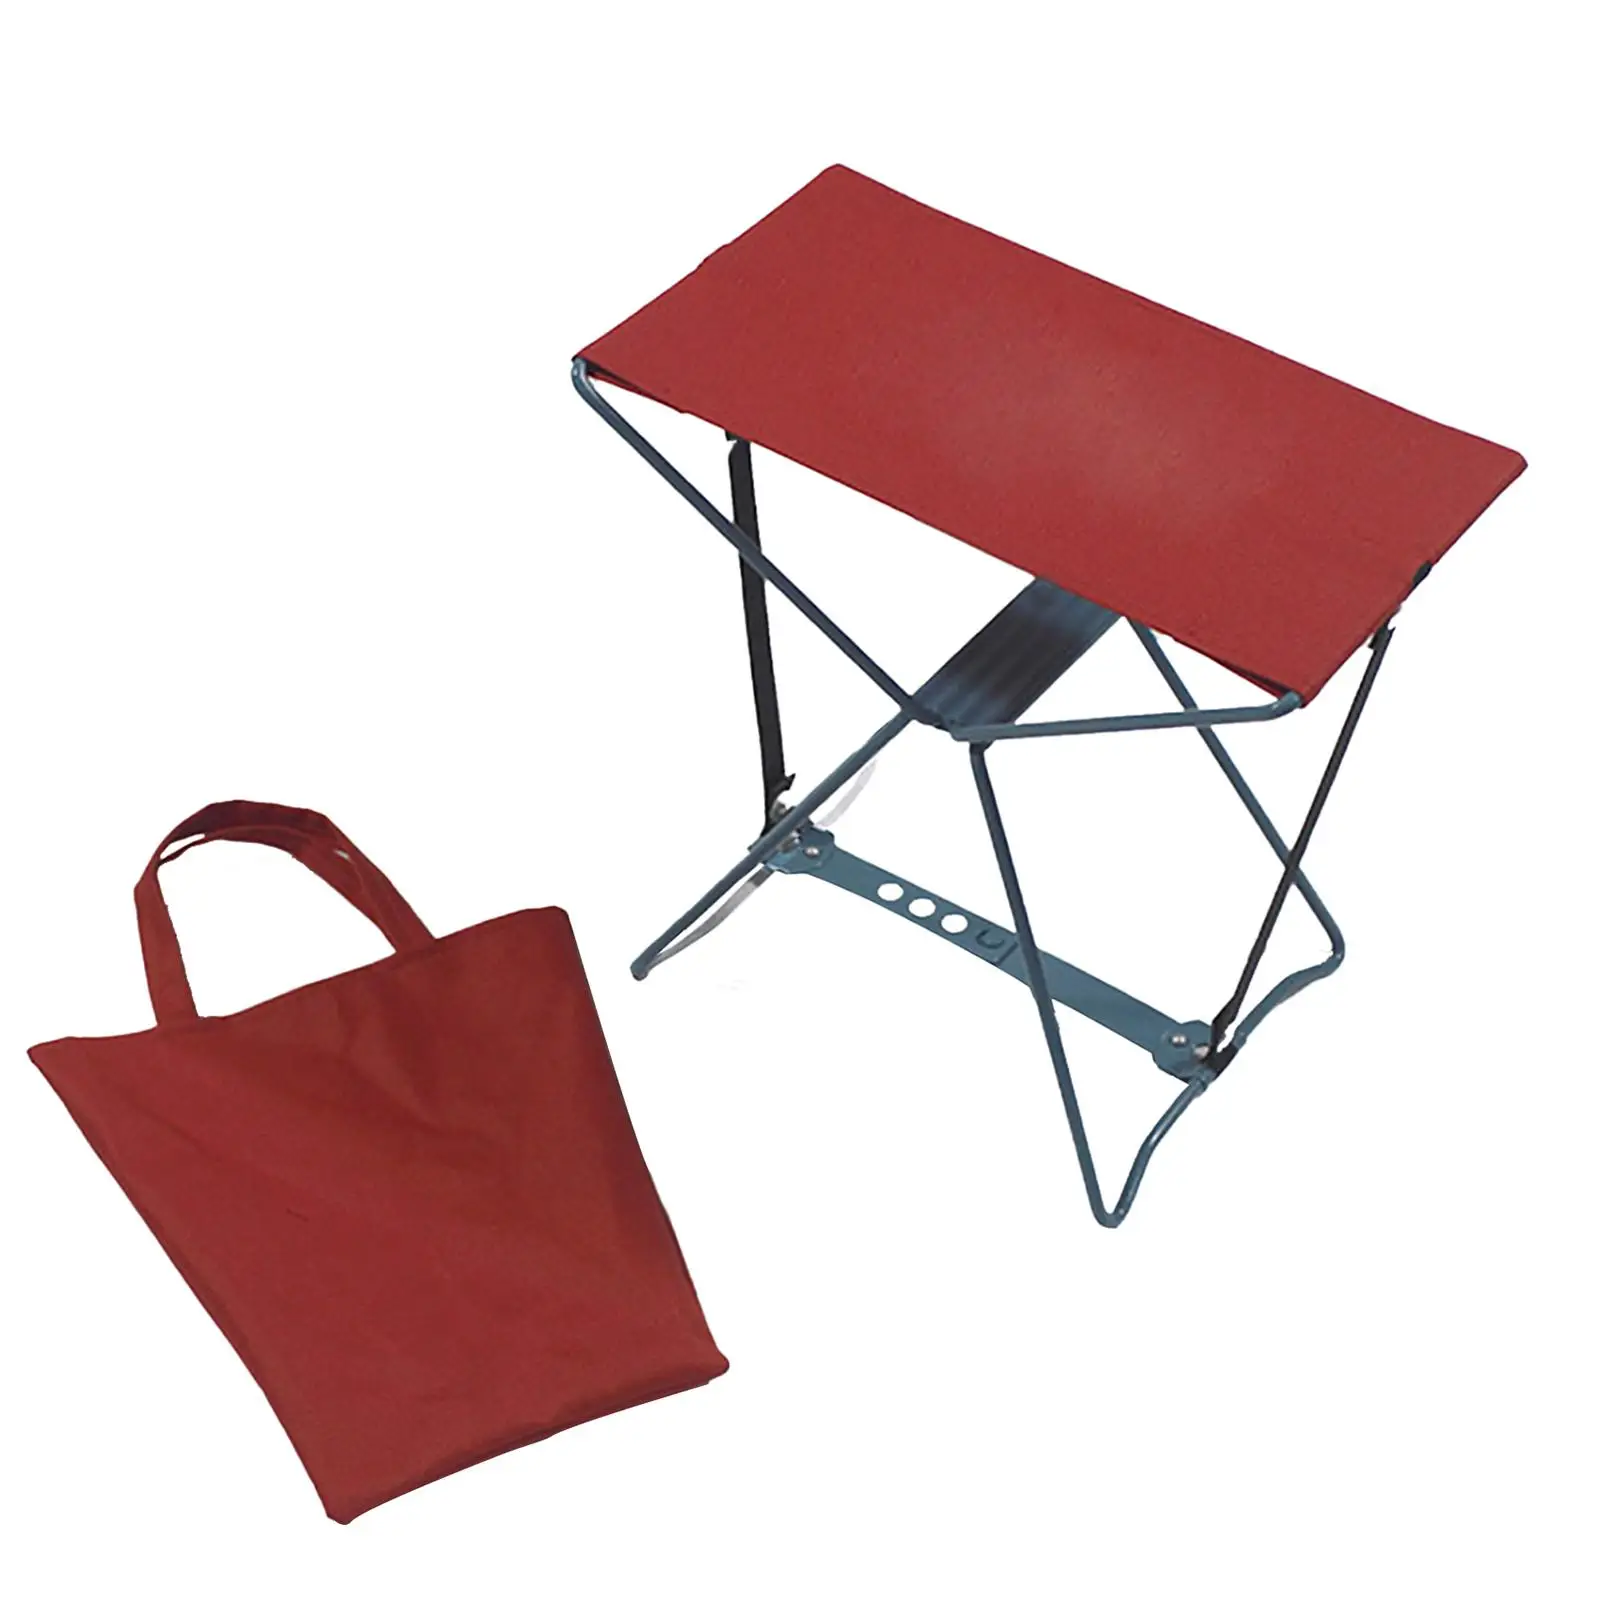 Folding Step Stool Lightweight Fishing Stool Small Chair for Kitchen Bathroom